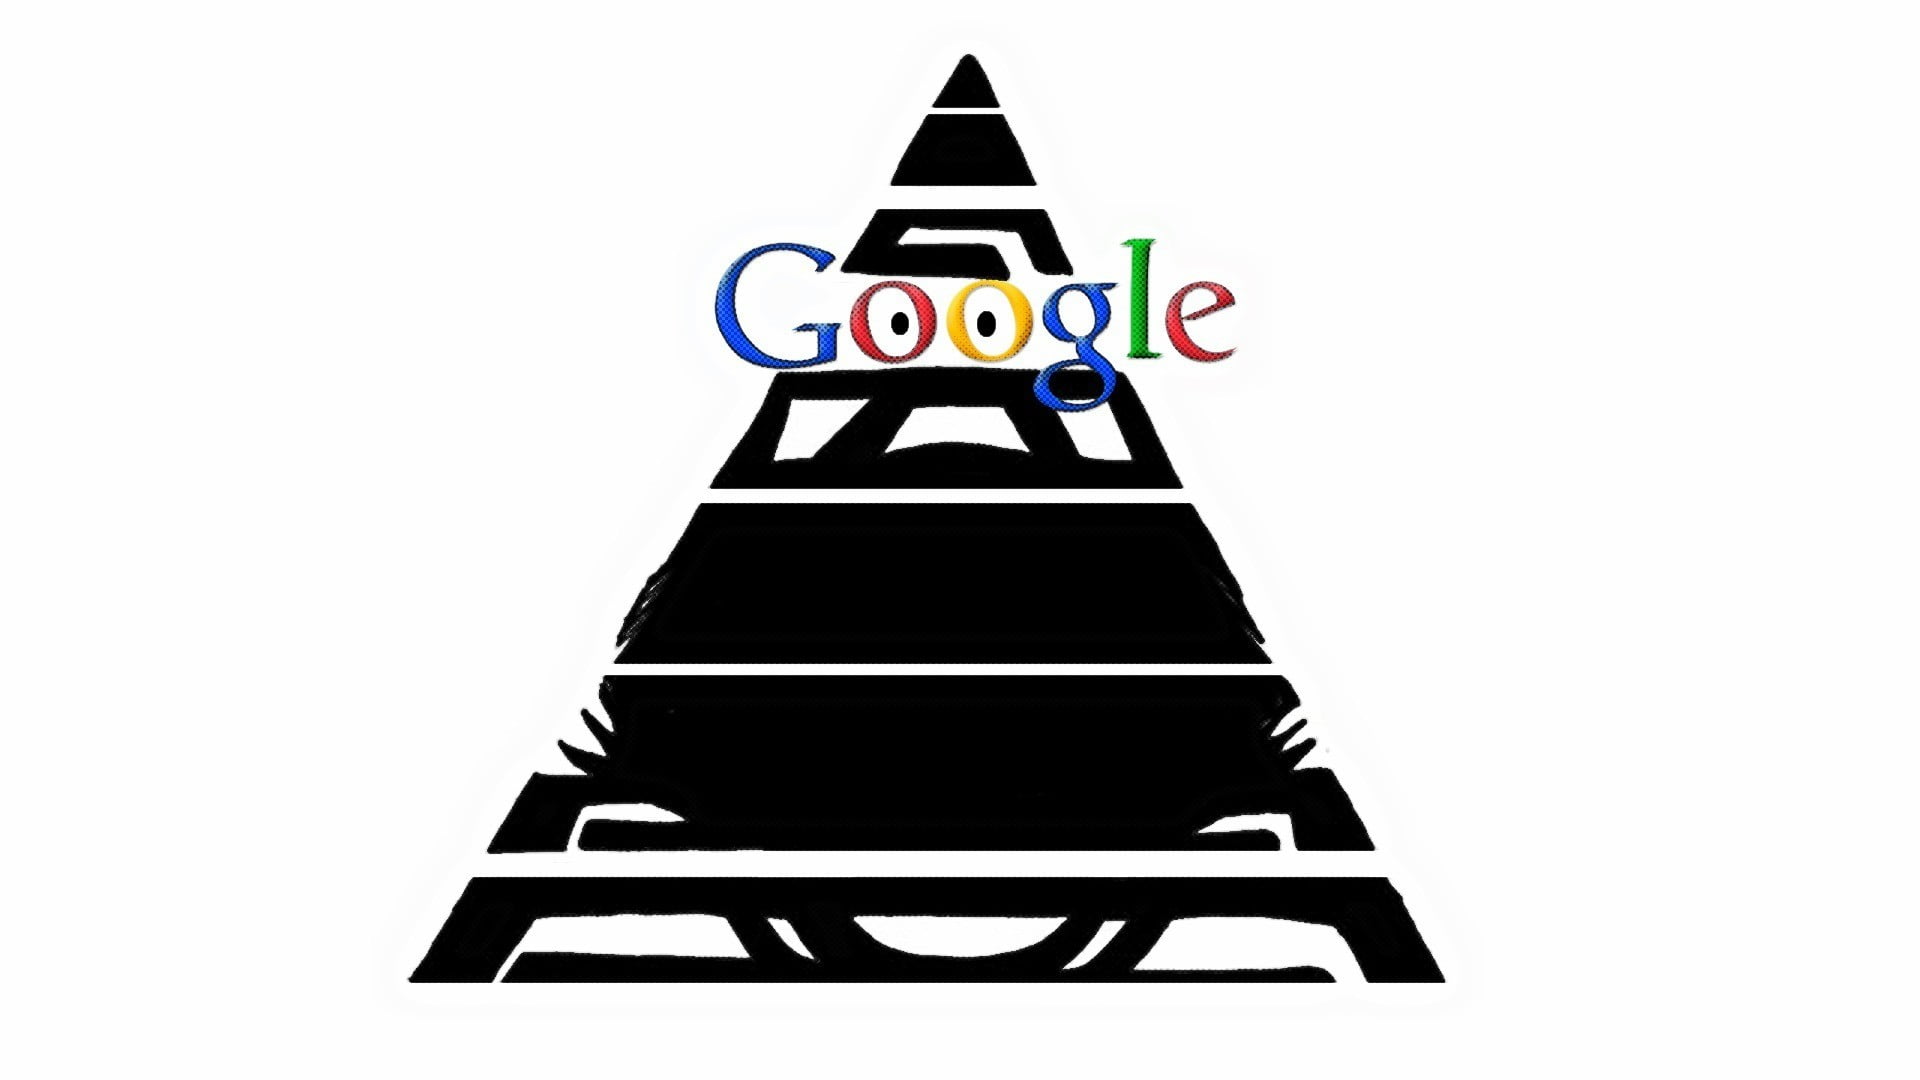 black and white wooden table, spies, pyramid, Google